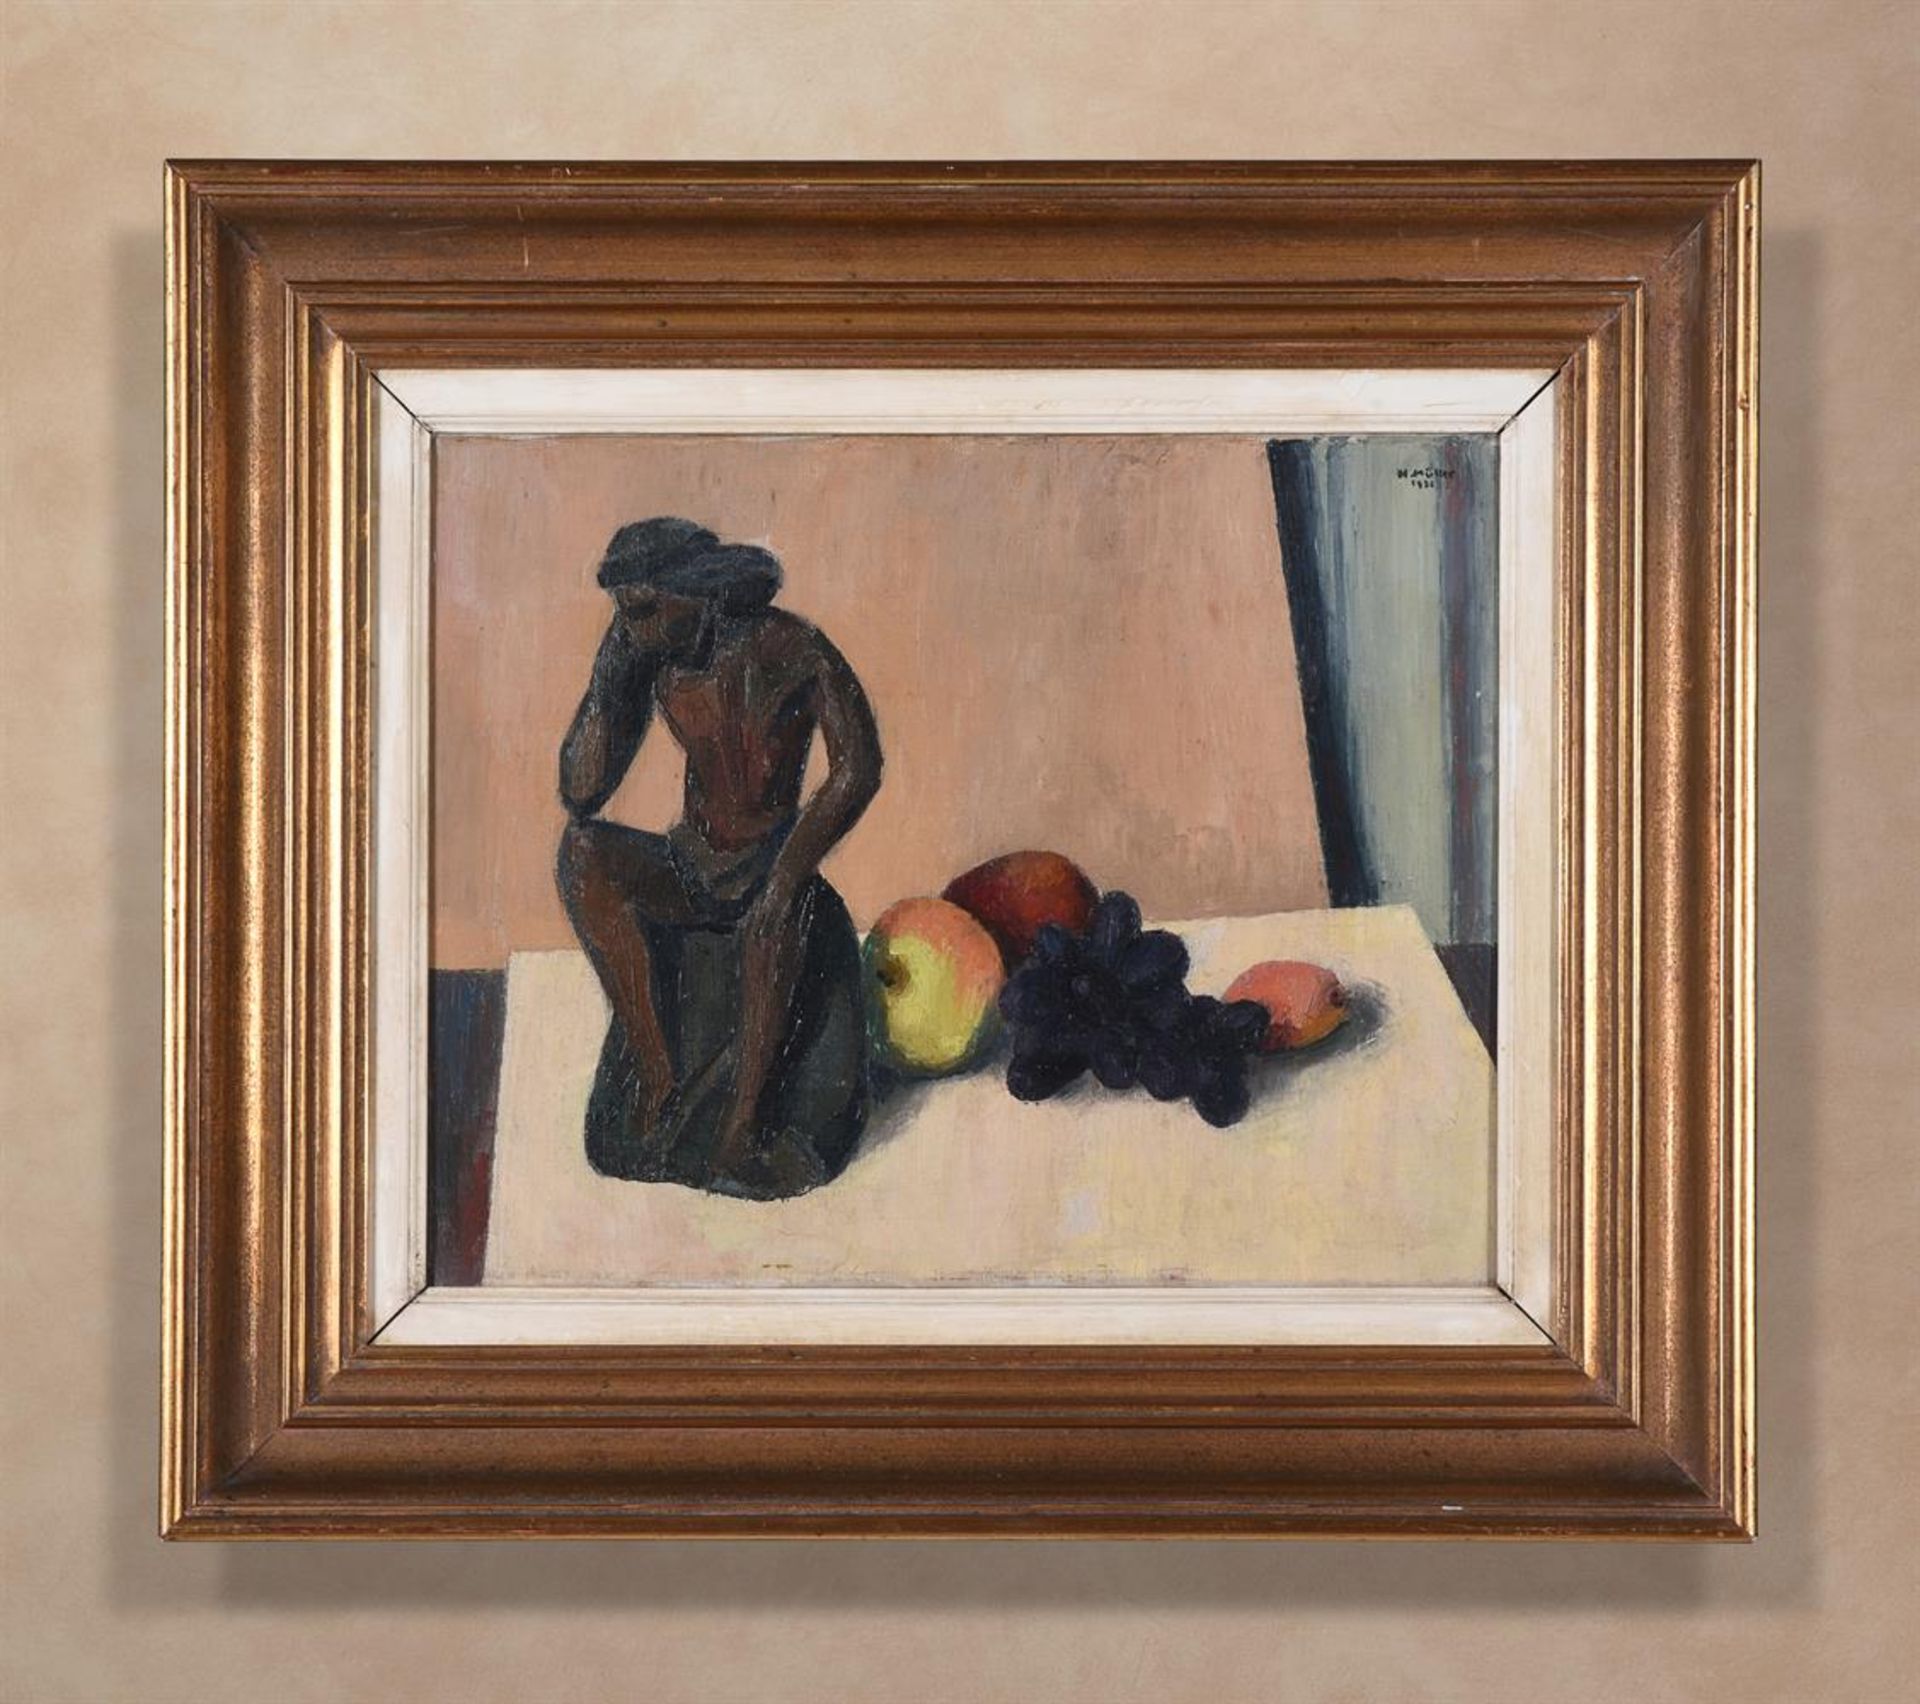 H. MÜLLER (20TH CENTURY), STILL LIFE WITH FRUIT AND A STATUE